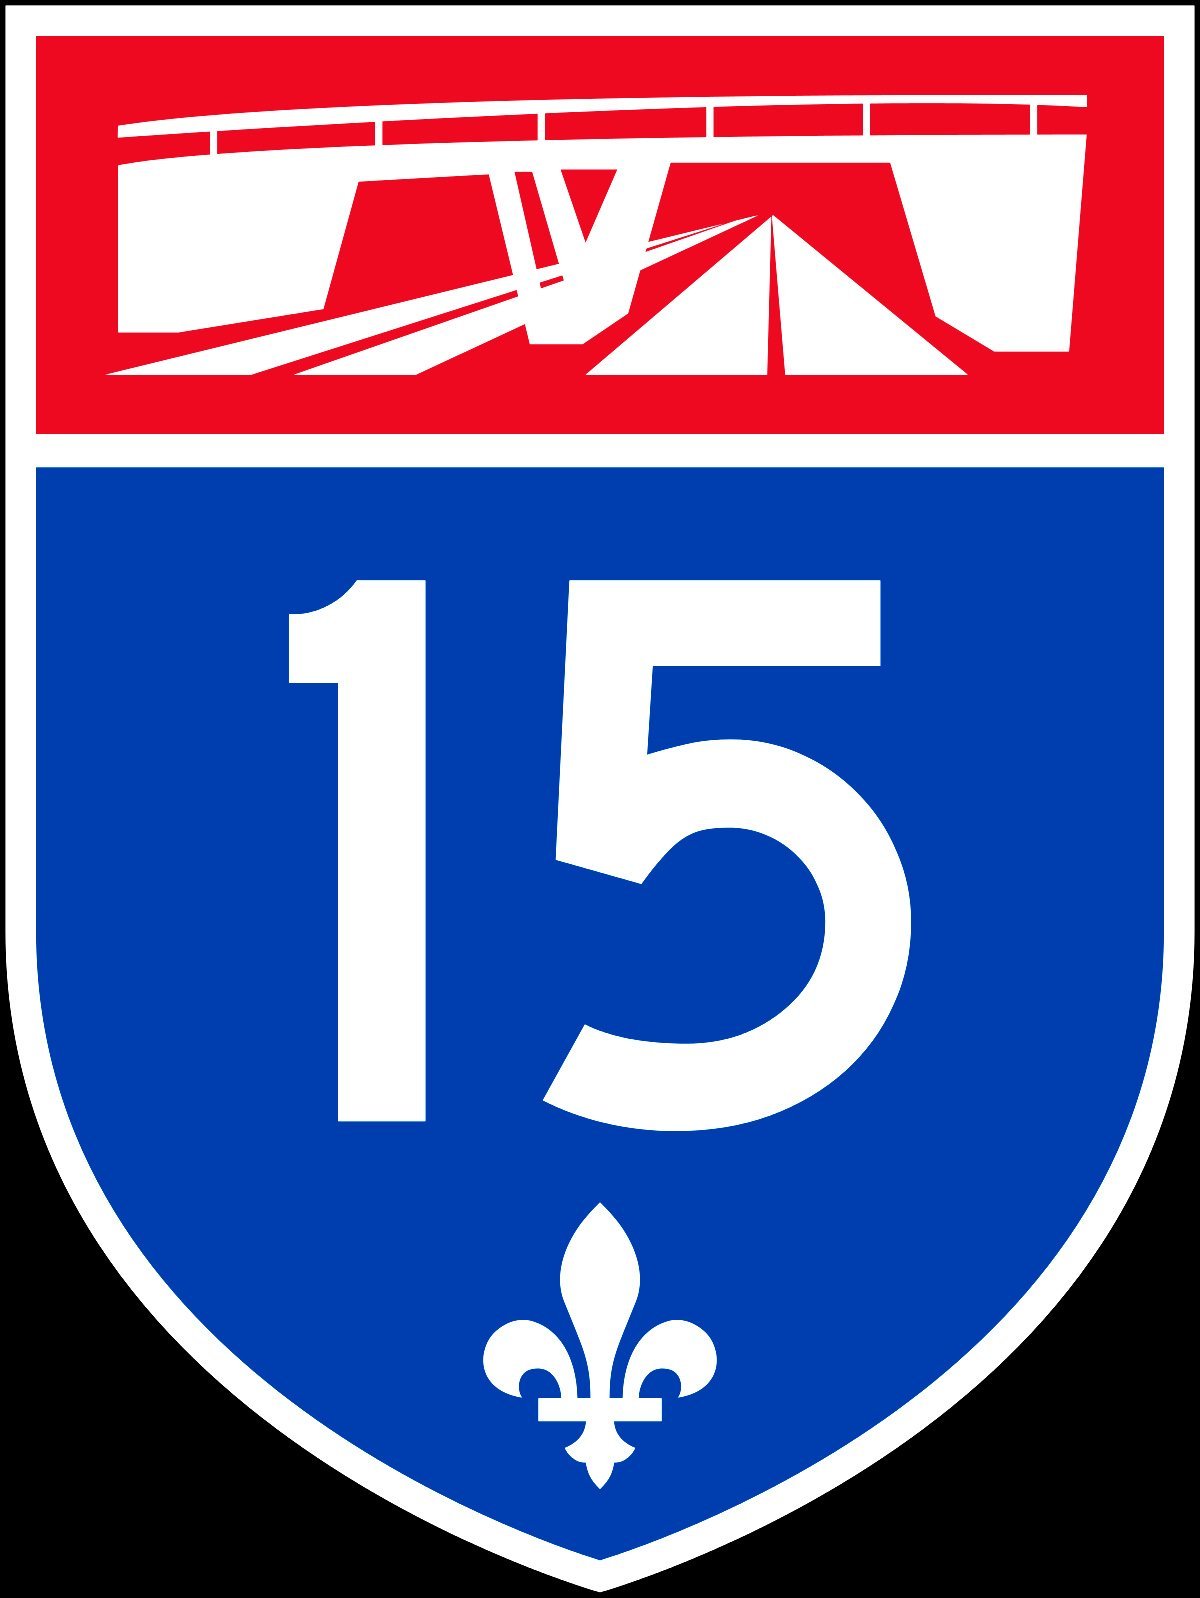 Autoroute 15 partly closed nights from July 18 – 29 at St. Jérôme and Mirabel for asphalting